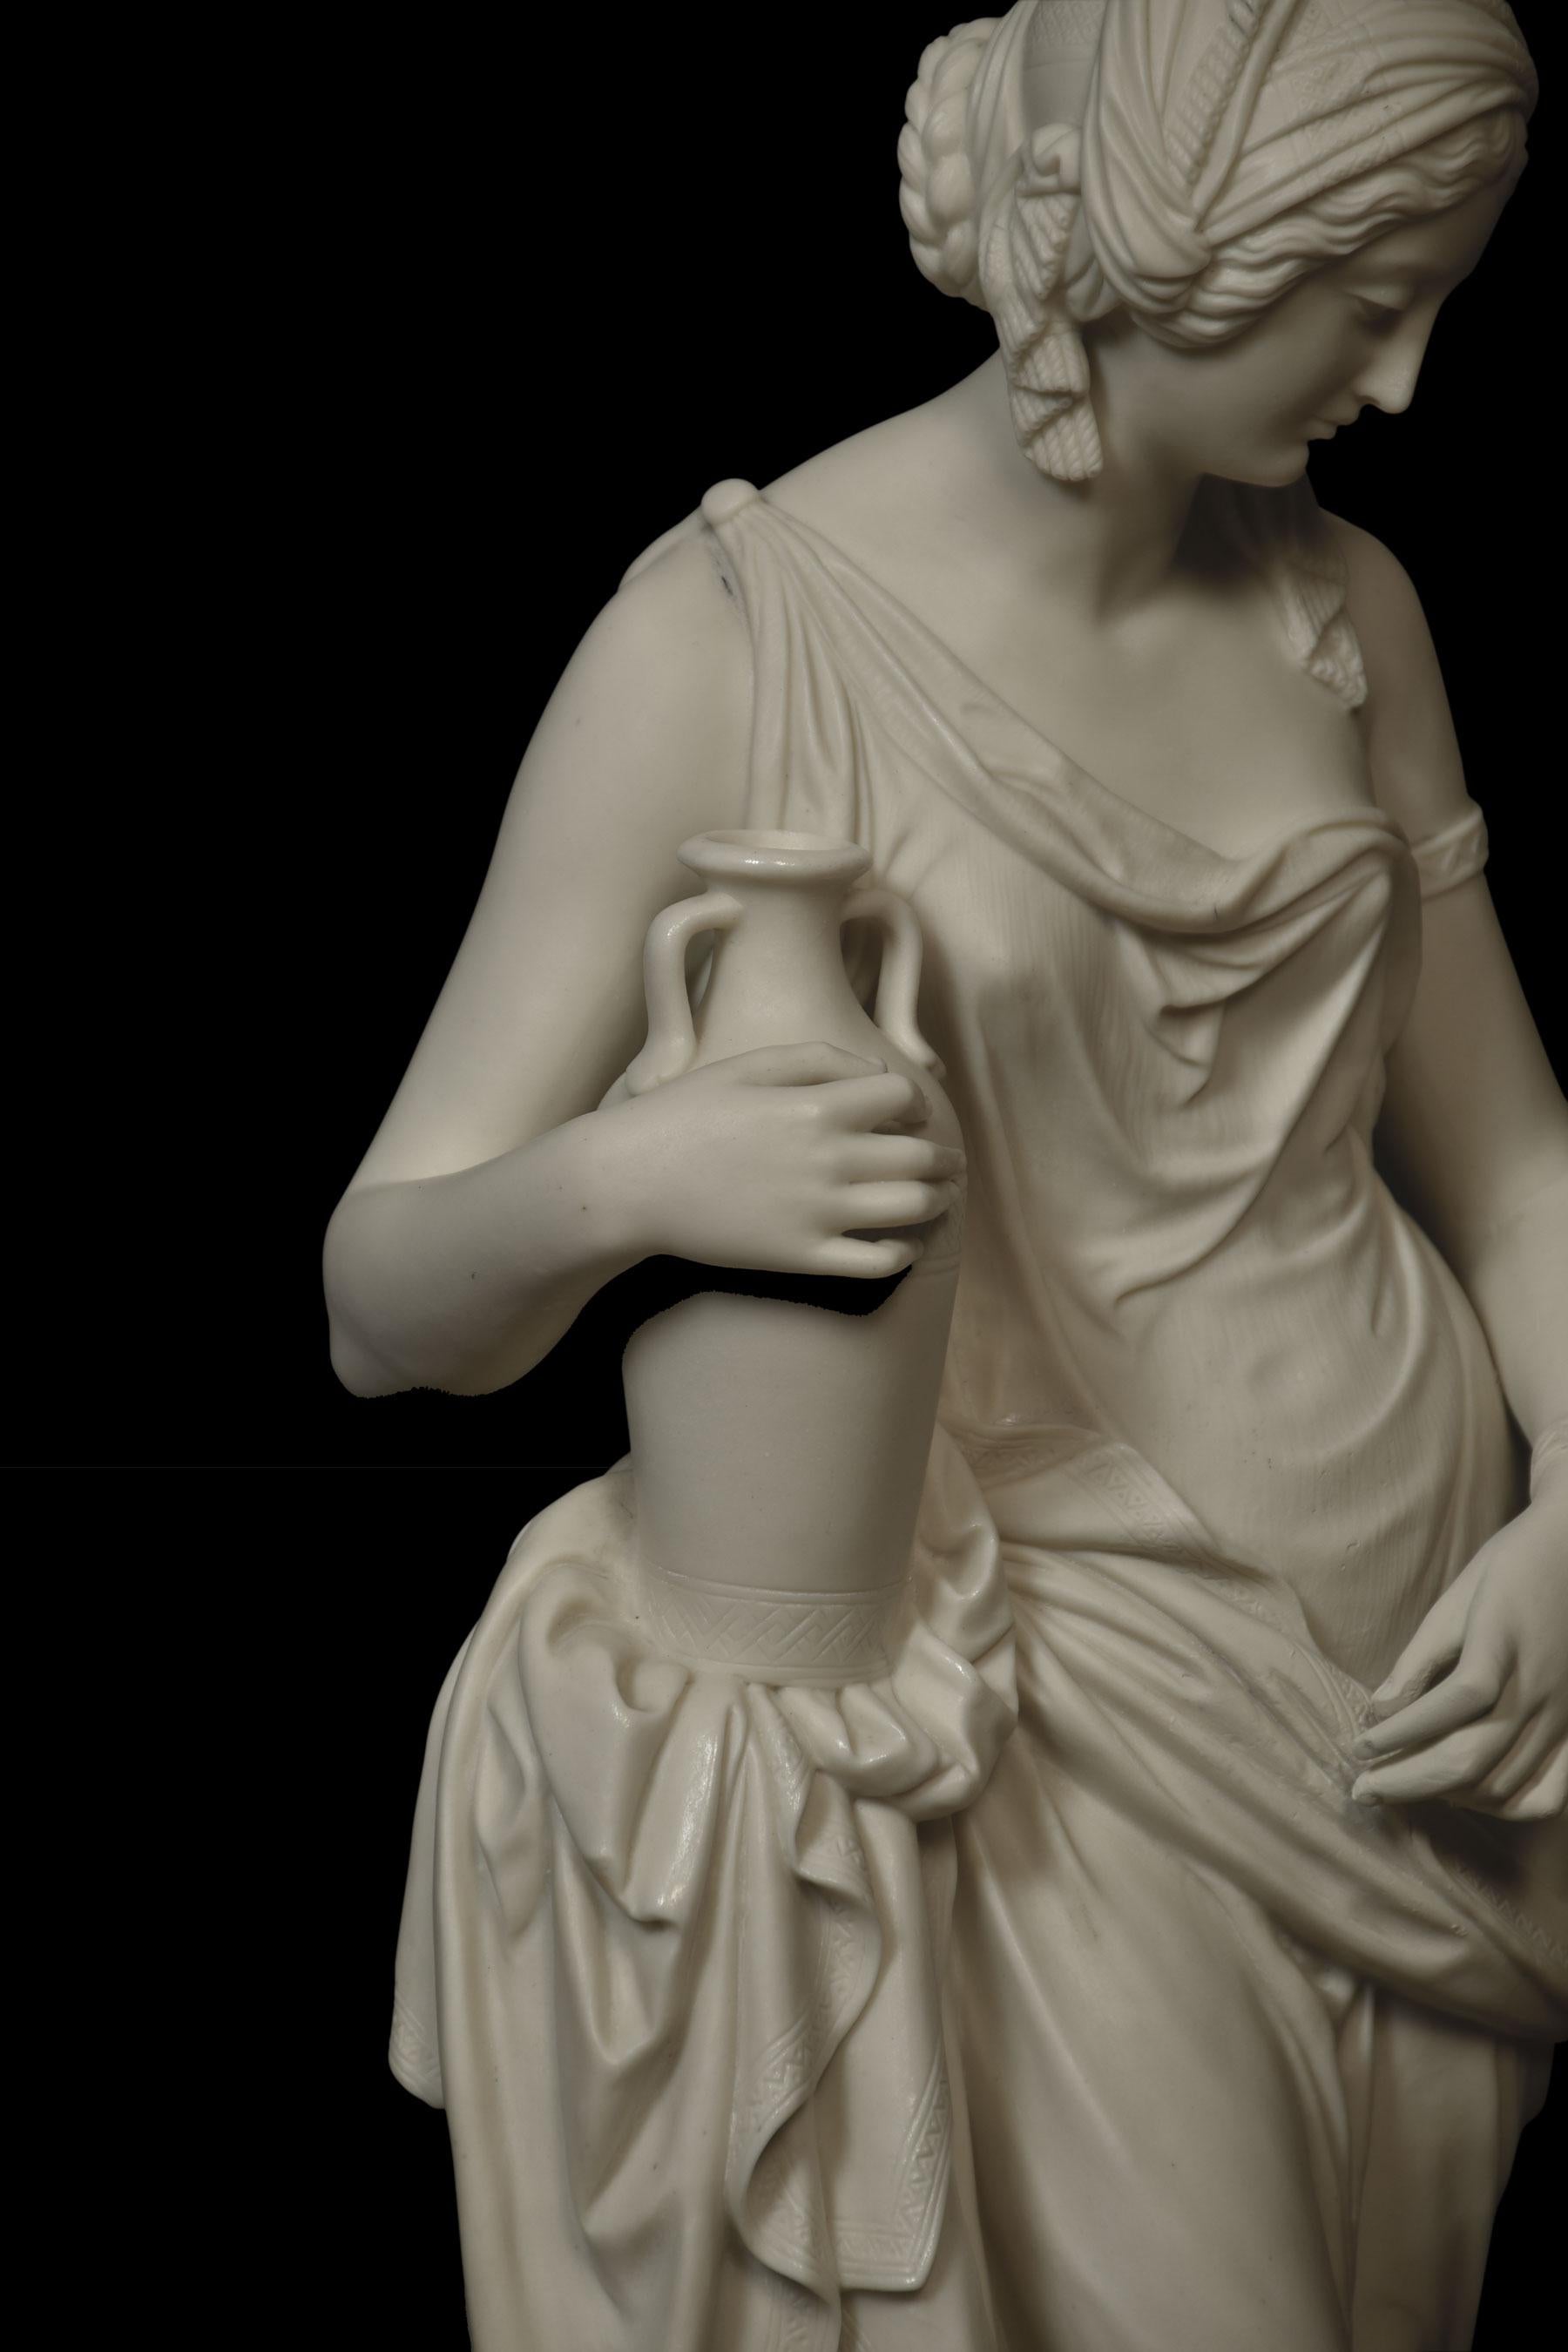 Opeland parian figure of Rebekah after William Theed, standing full length by a palm, wearing flowing robes with her right hand resting on an amphora. raised up on circular base.
Dimensions:
height 20 inches.
width 8 inches.
depth 8 inches.